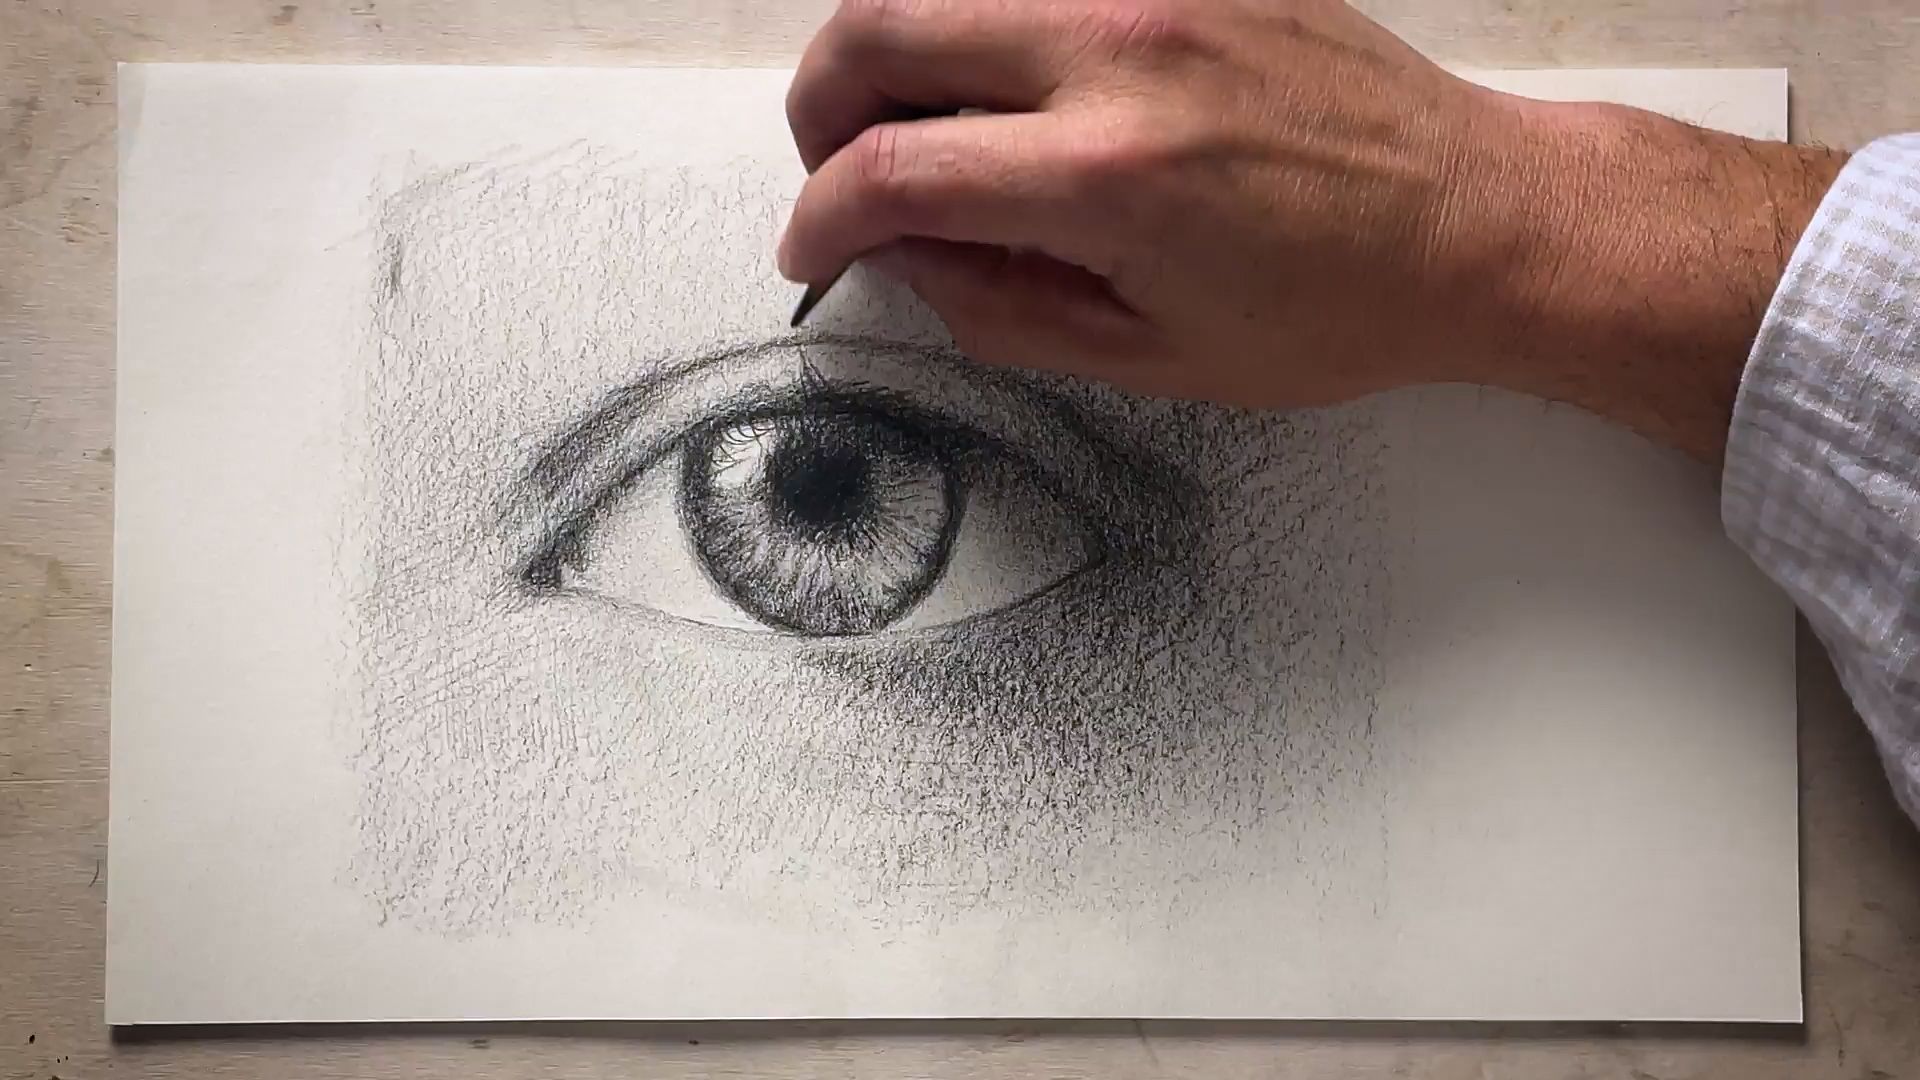 How To Draw Eyes In 7 Steps: A Visual Guide